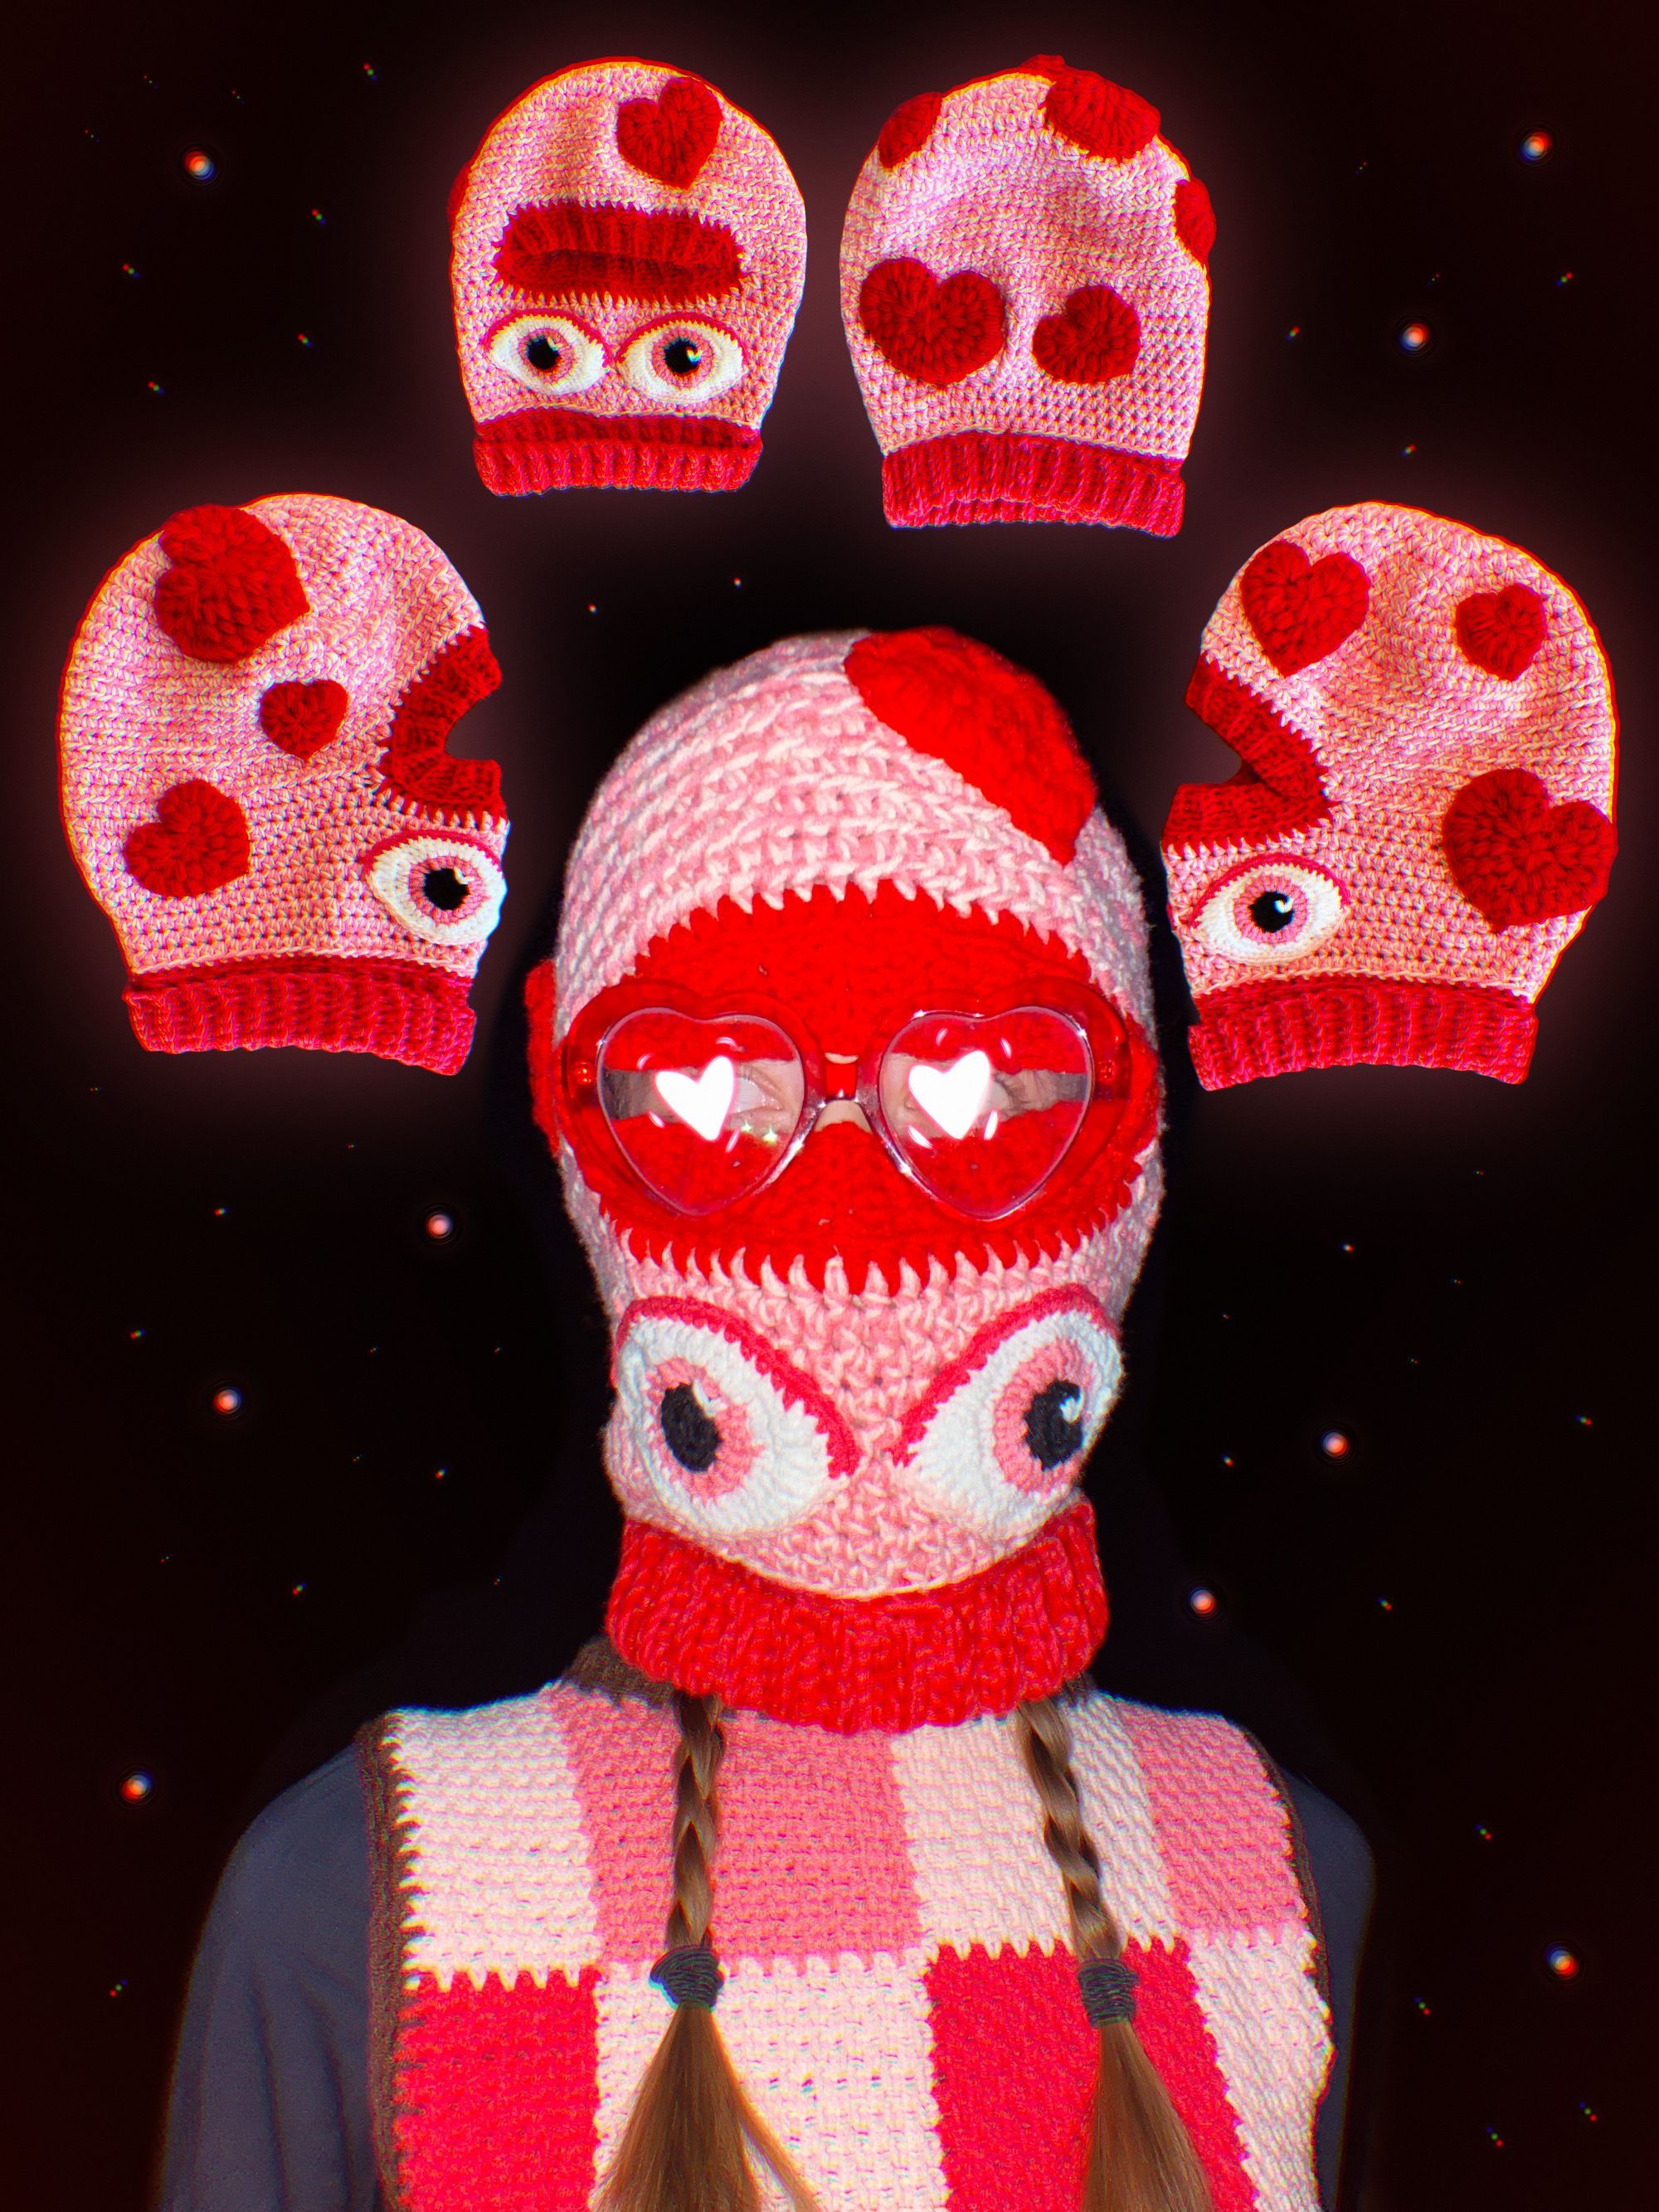 Crocheted mask and vest. The mask has eyes attached.